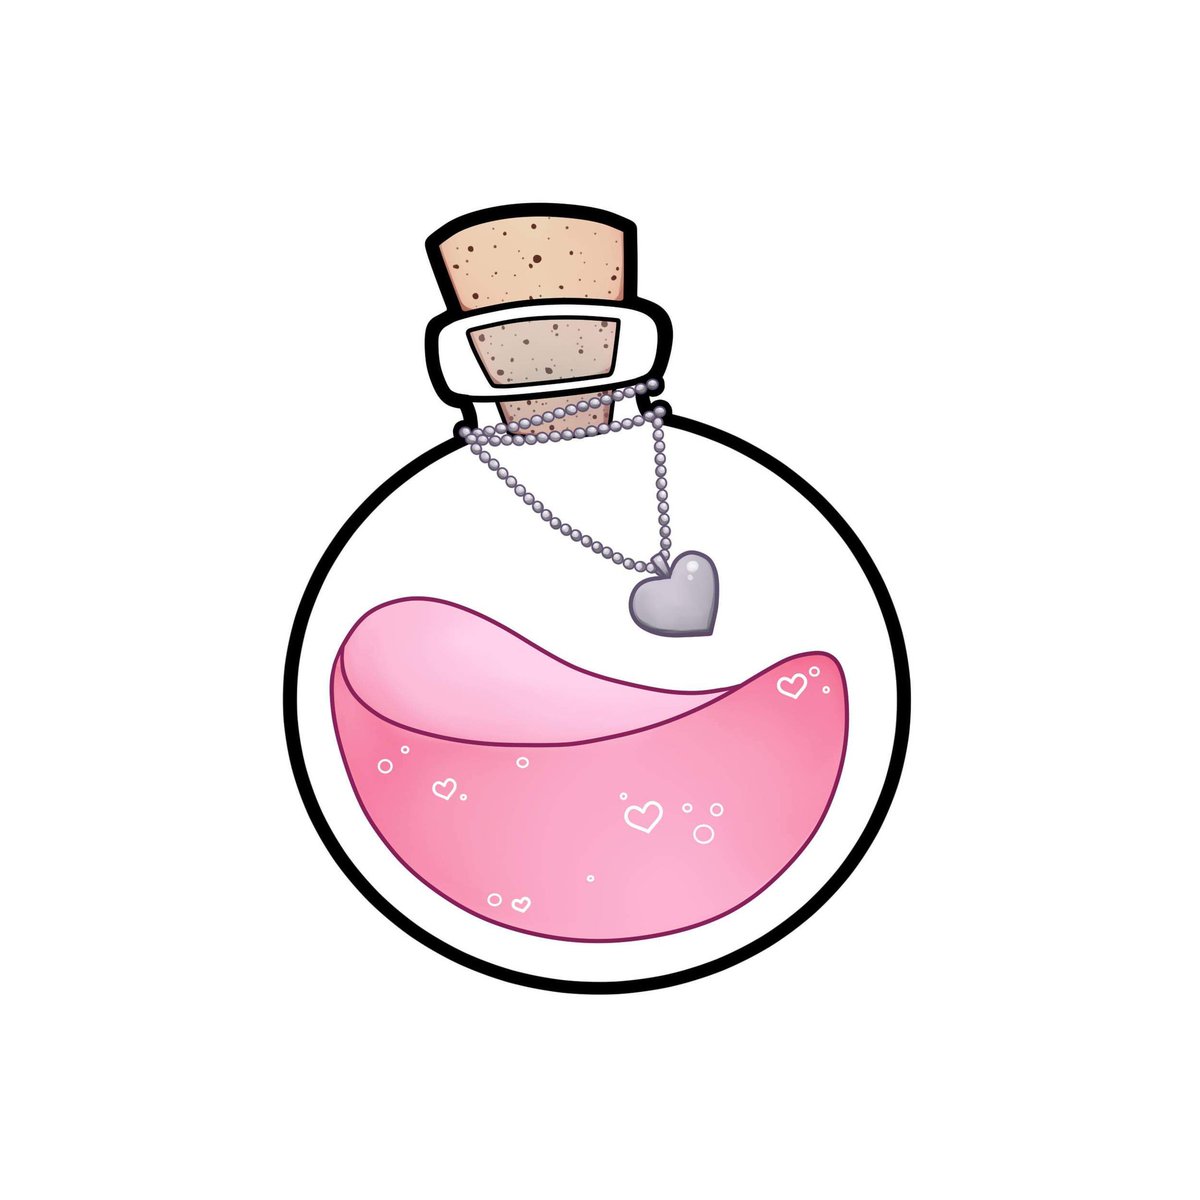 Smooth Love Potion